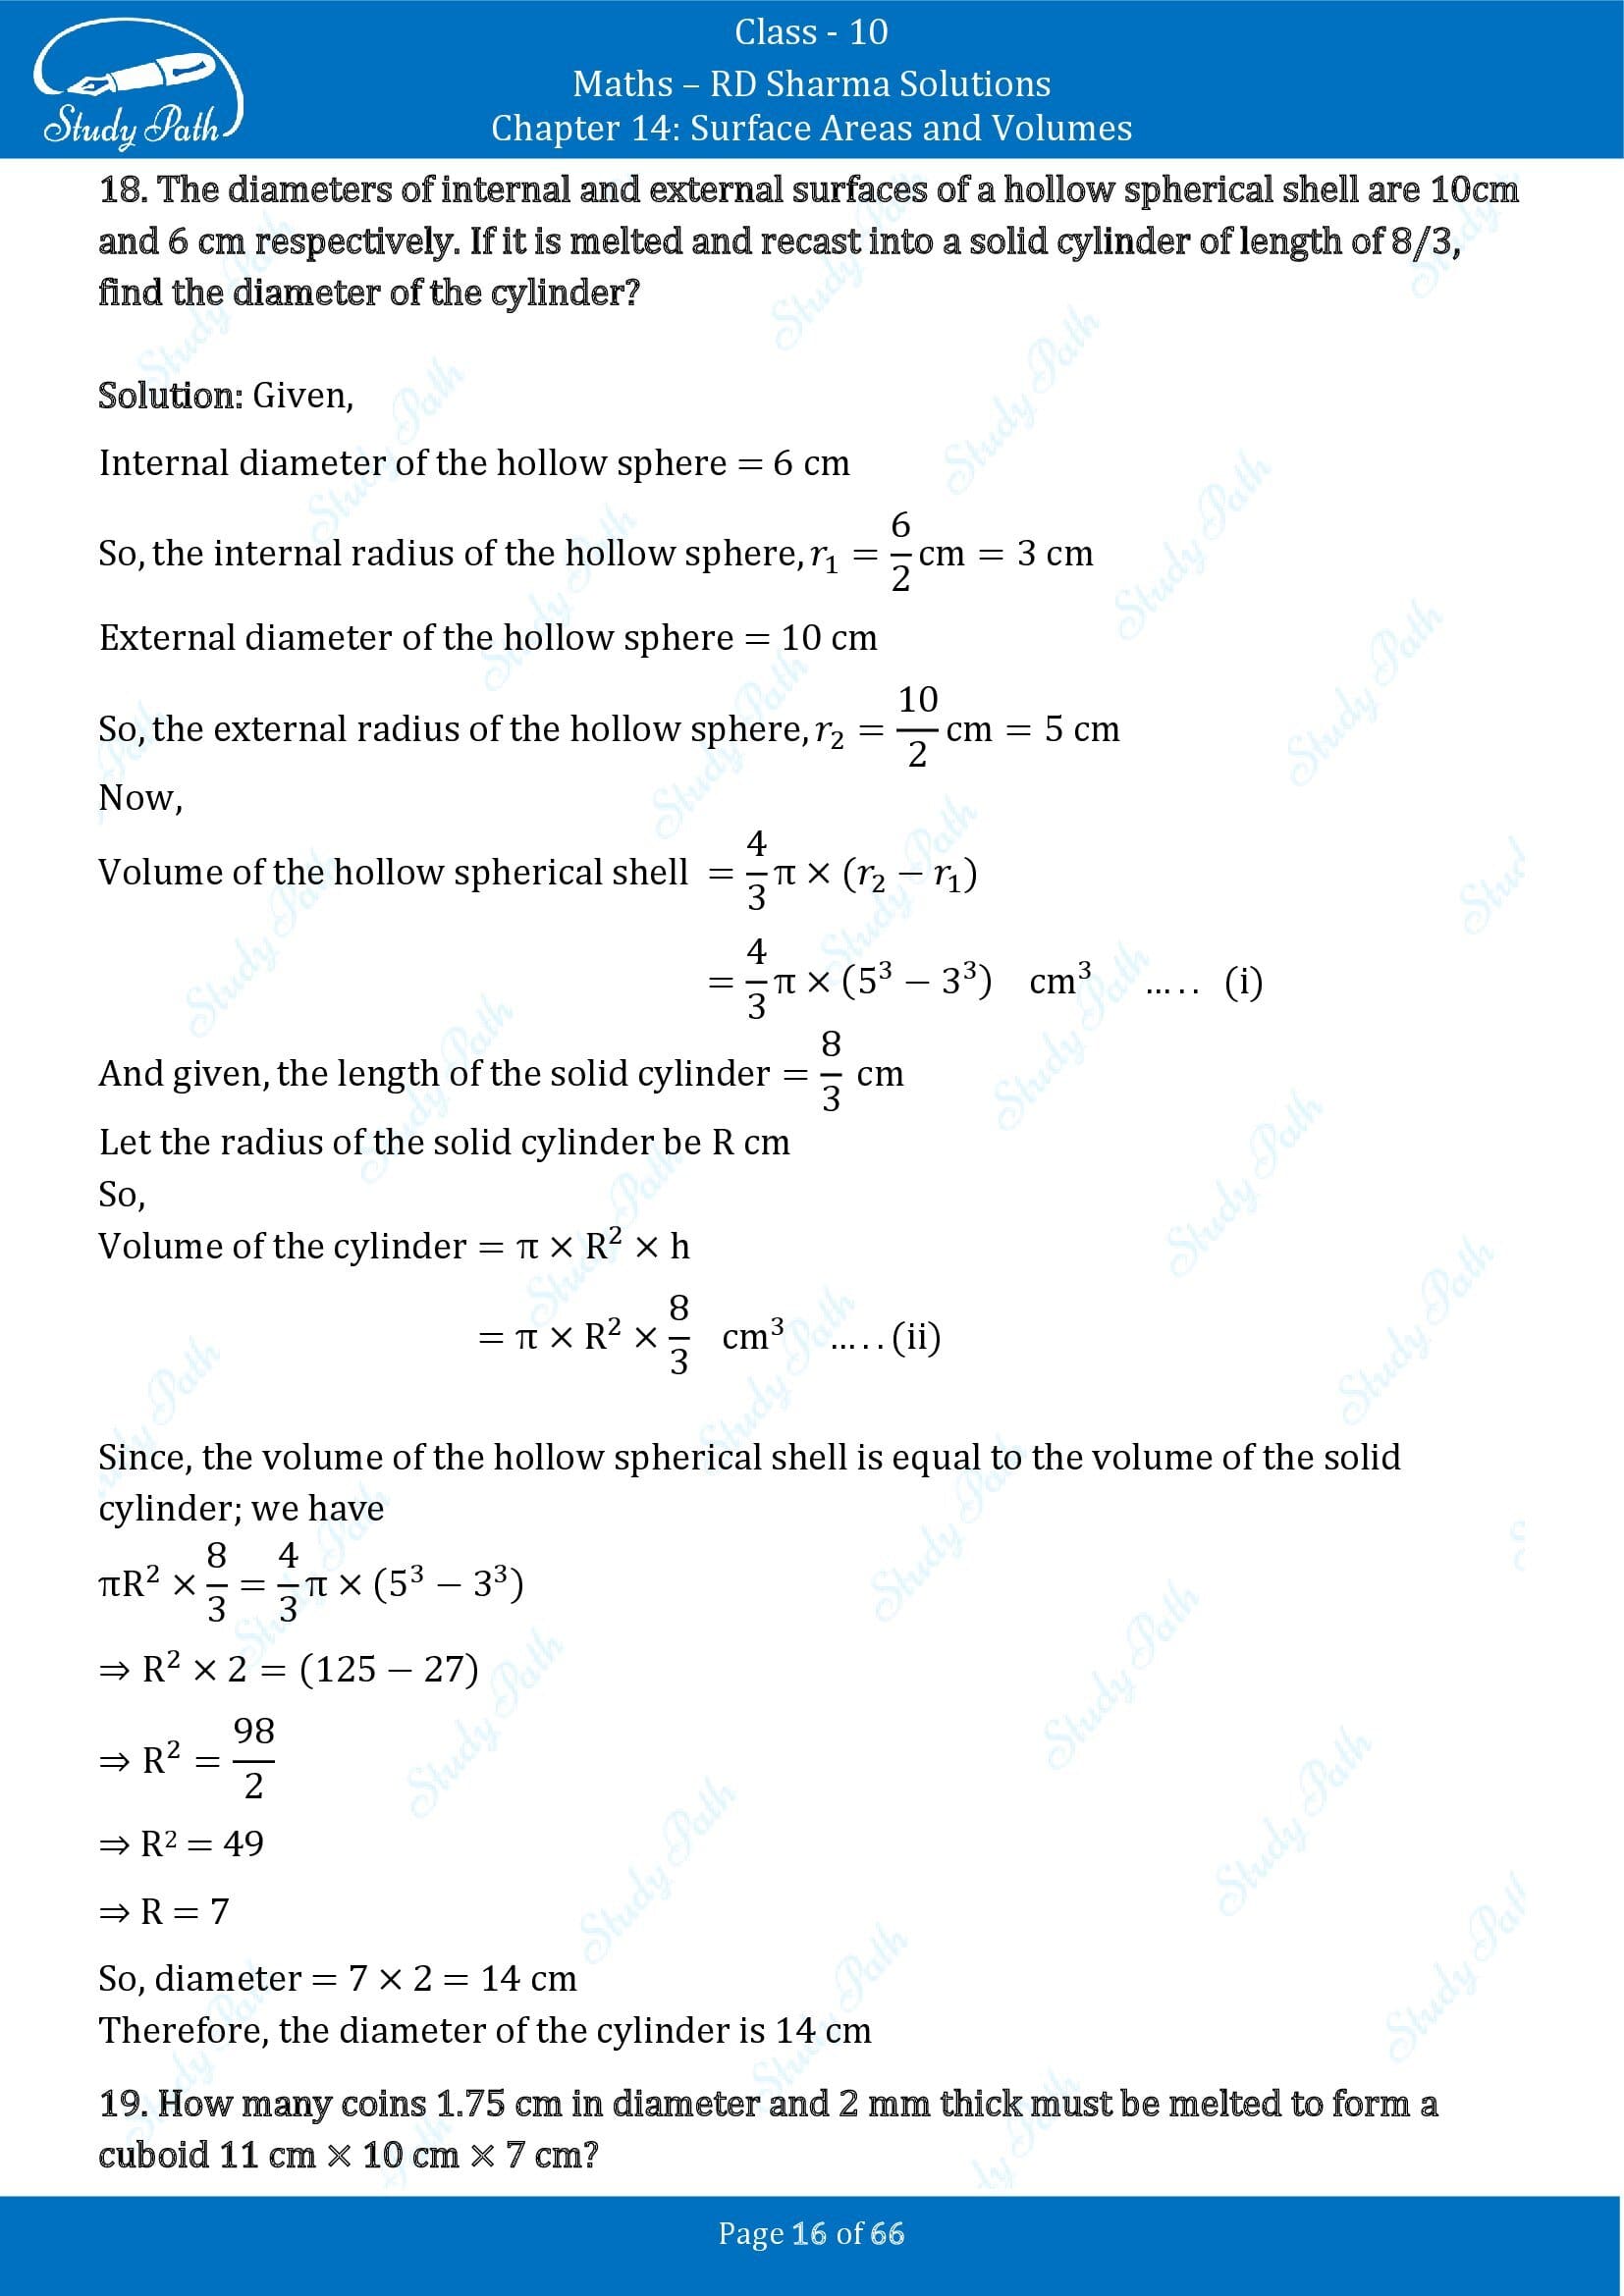 RD Sharma Solutions Class 10 Chapter 14 Surface Areas and Volumes Exercise 14.1 00016